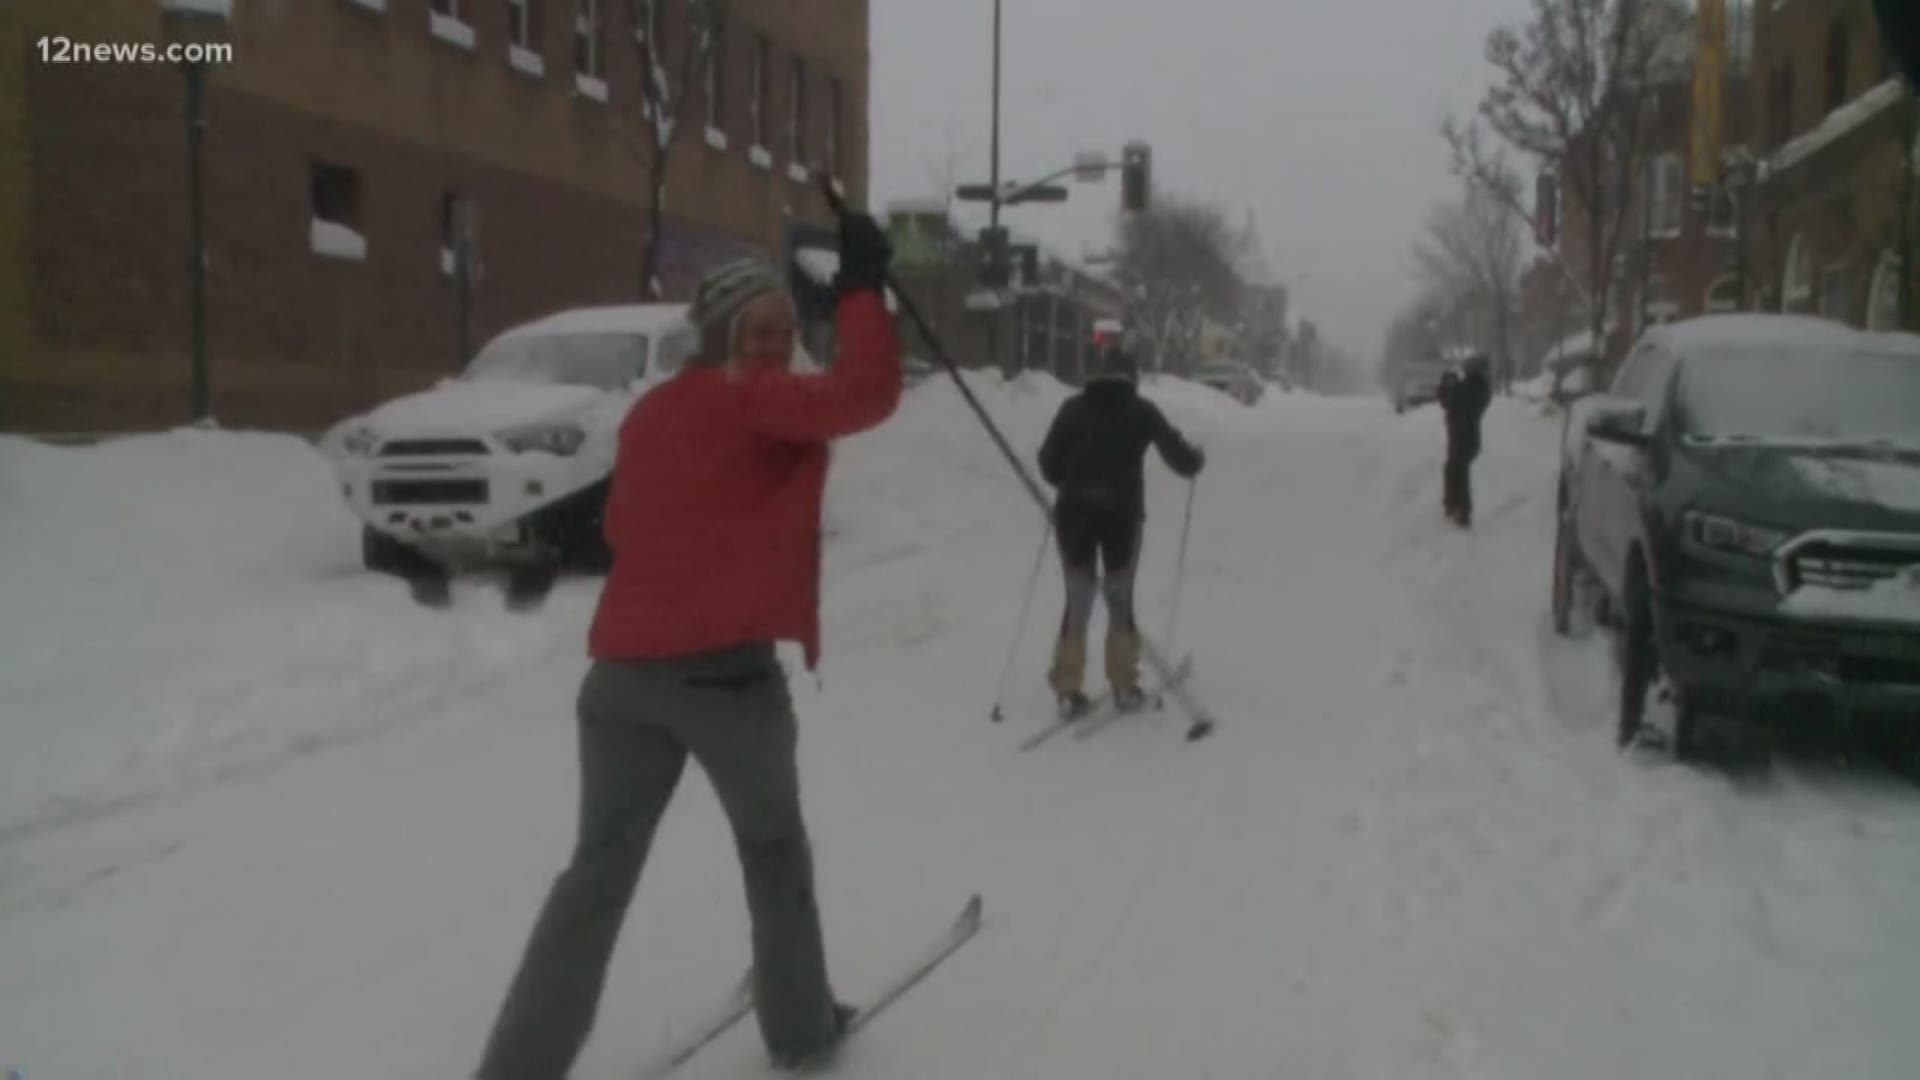 Some roads are ready for cars after a historic snowstorm in Flagstaff. But for those roads that are not car ready people are taking to their cross country skis to get around.